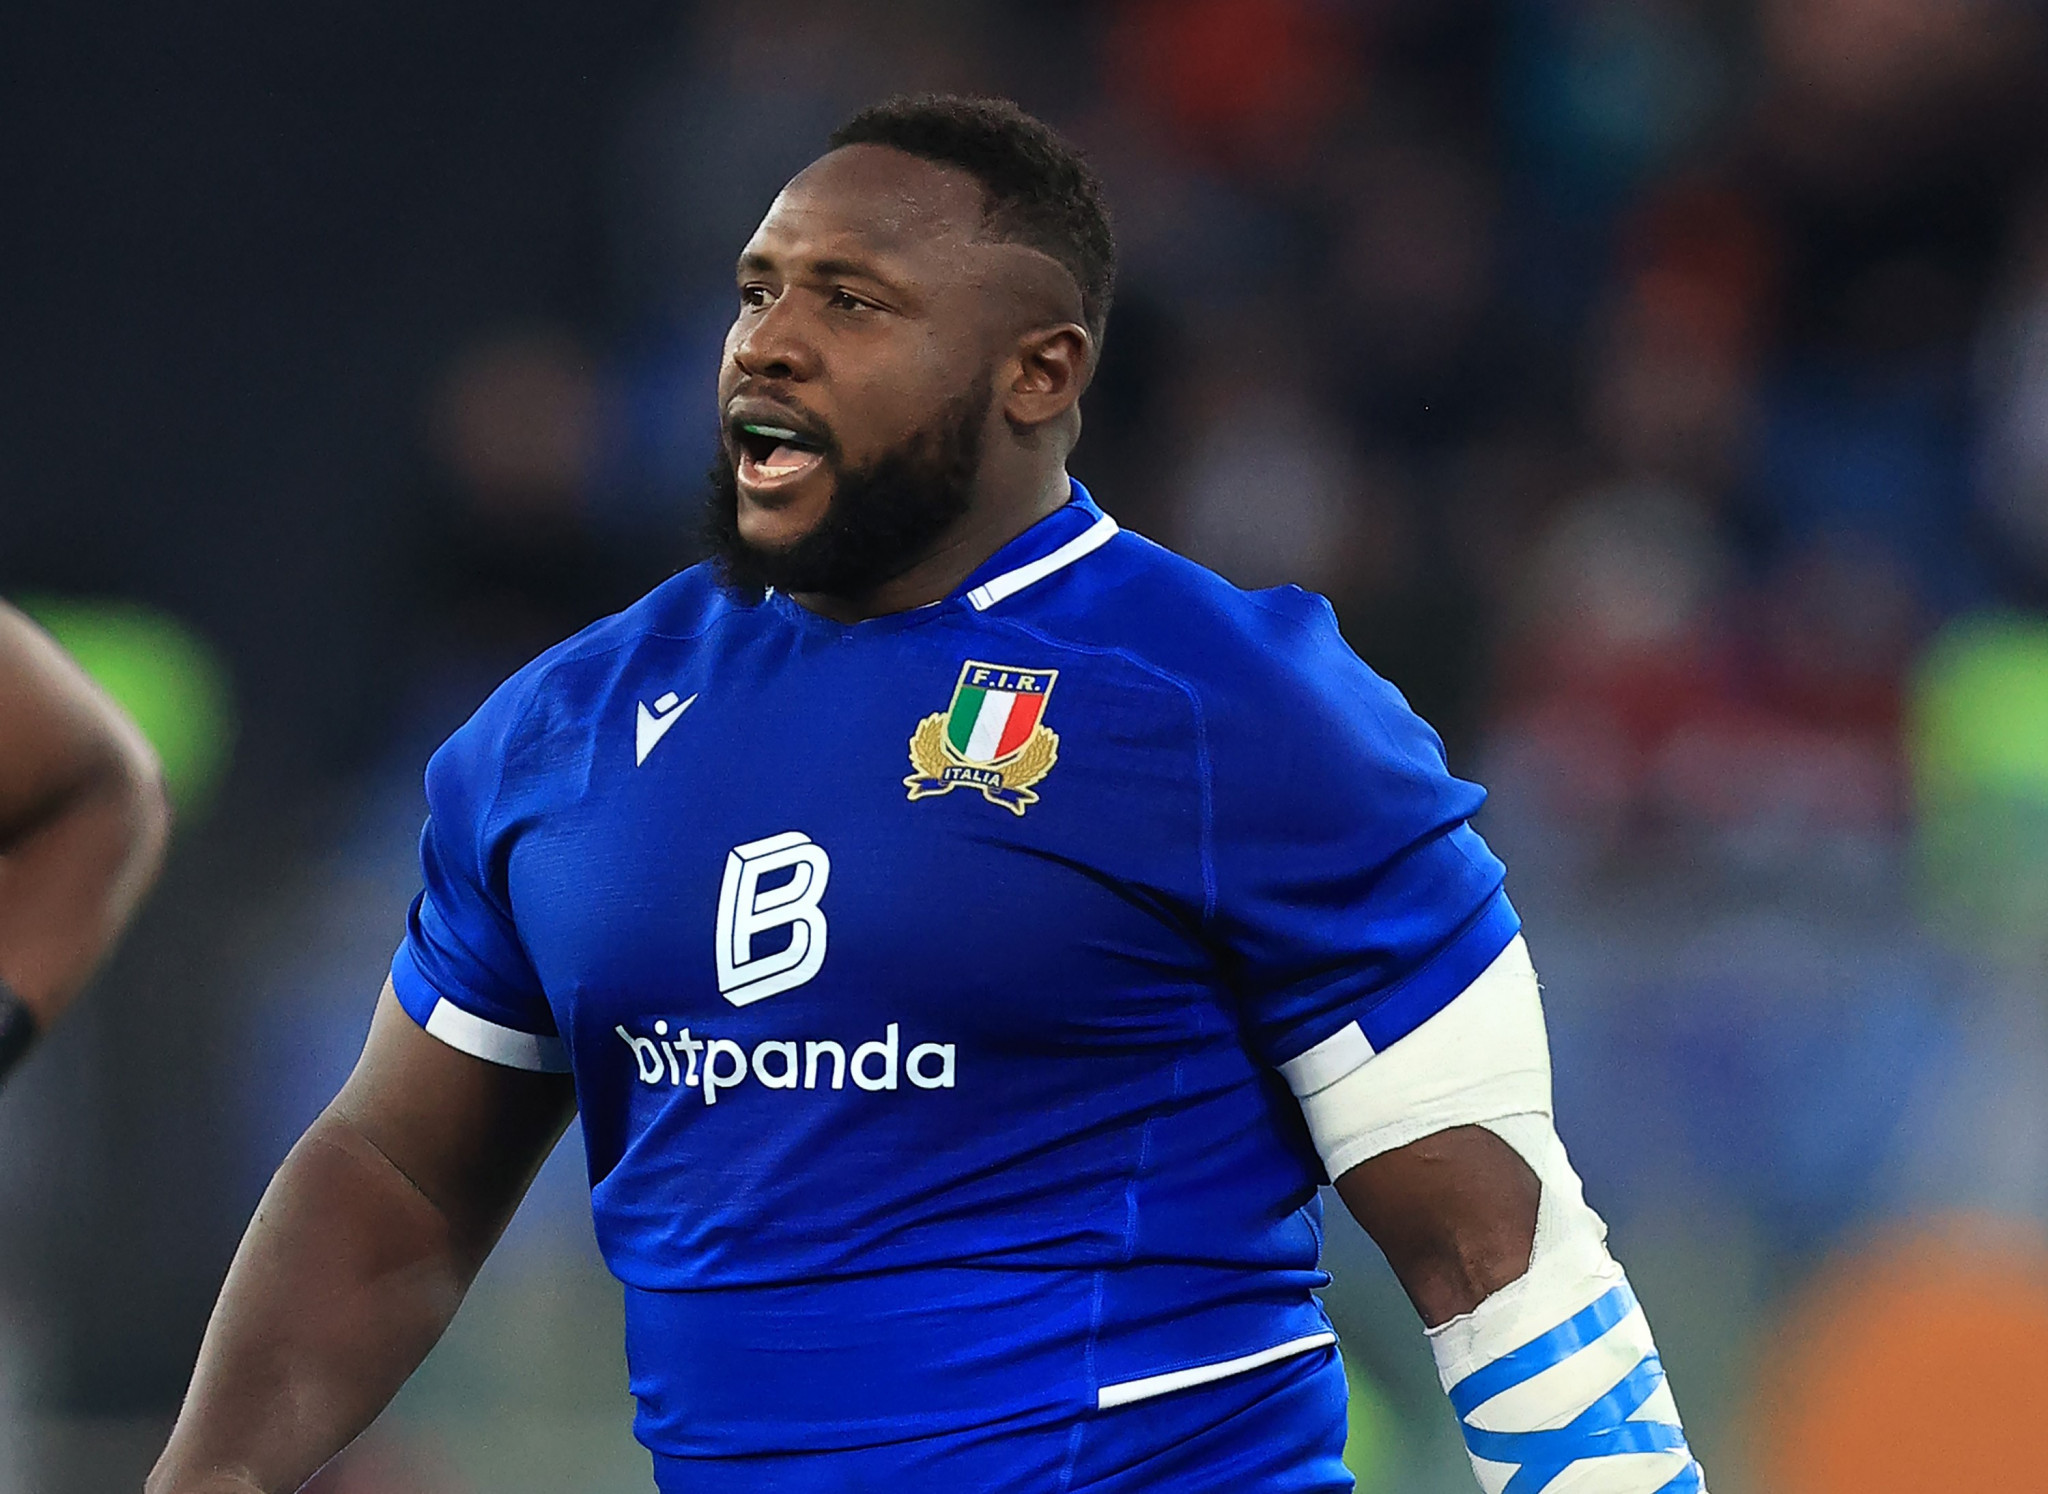 The Italian Rugby Federation showed others how it's done by swiftly launching an investigation into Cherif Traore's racism claims ©Getty Images